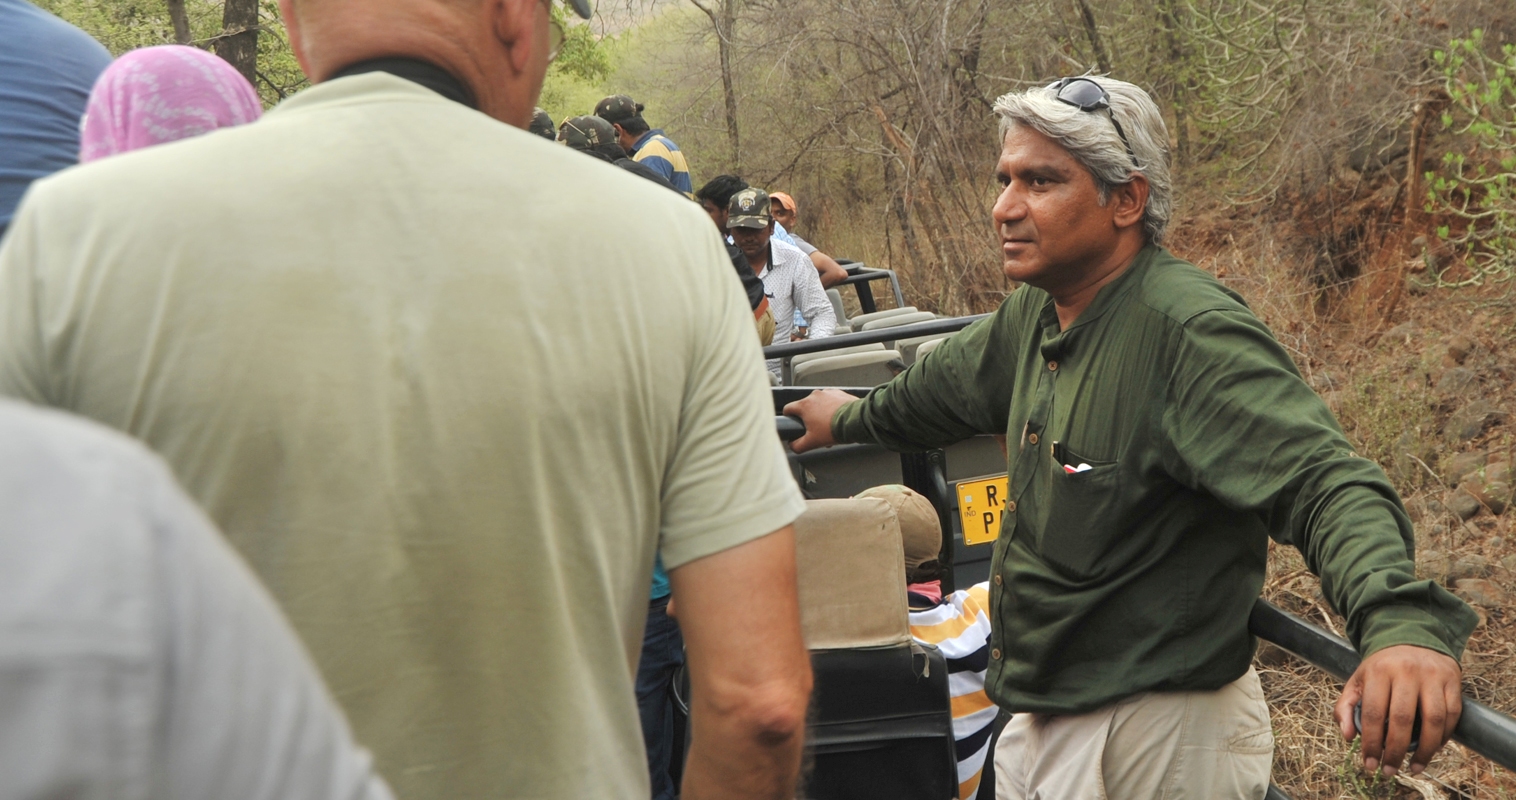 The self-taught guides are vital to tiger tourism in Ranthambore, but they earn very little